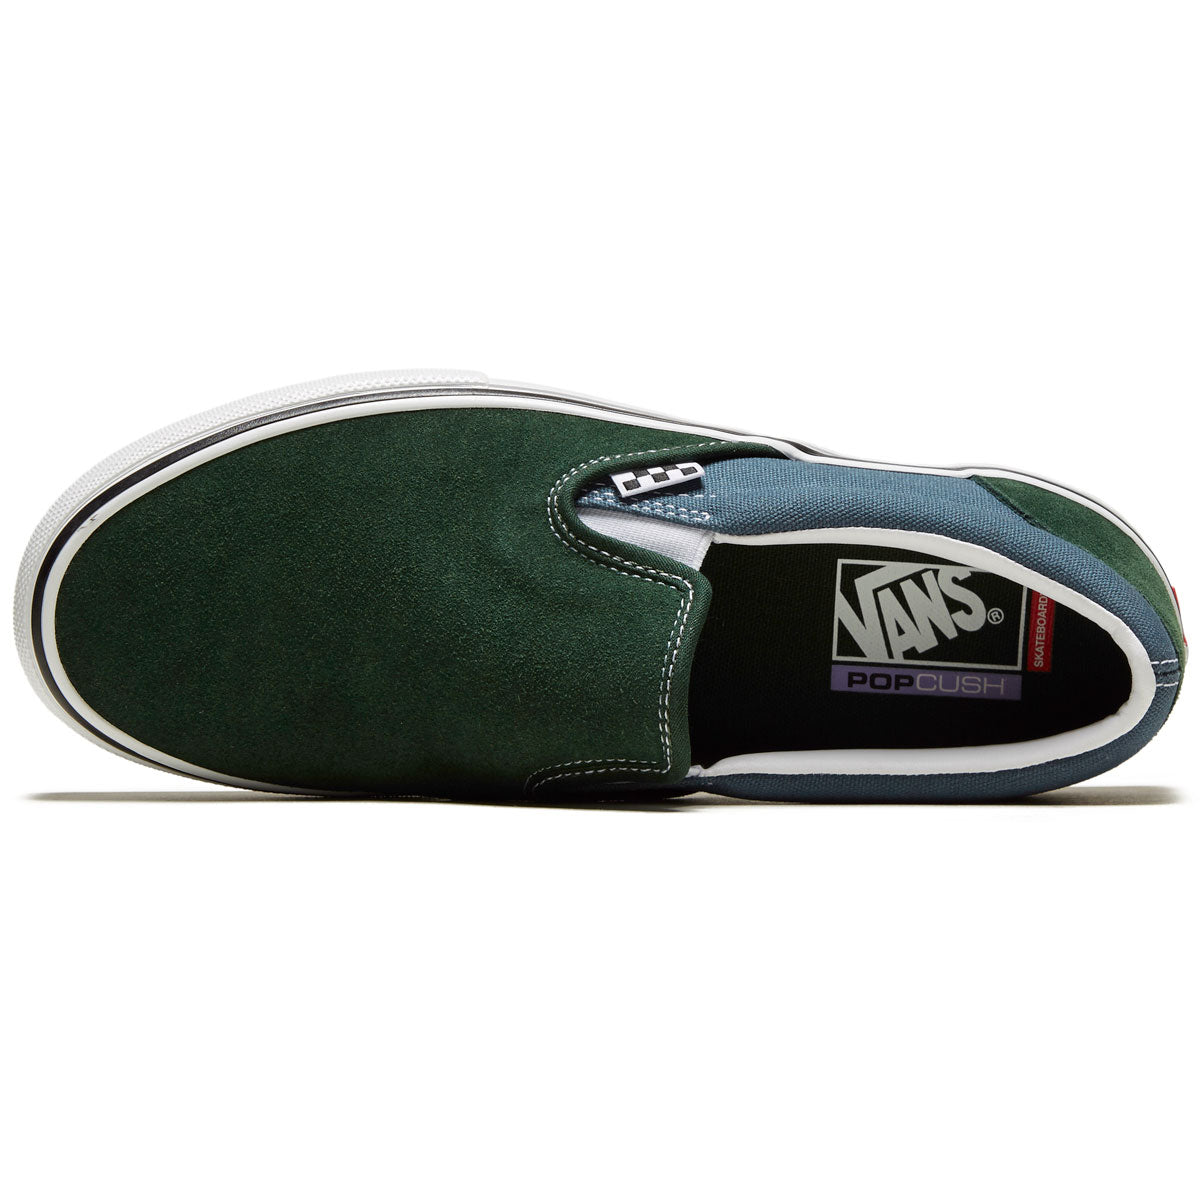 Vans Skate Slip-on Shoes - Mountain View image 3